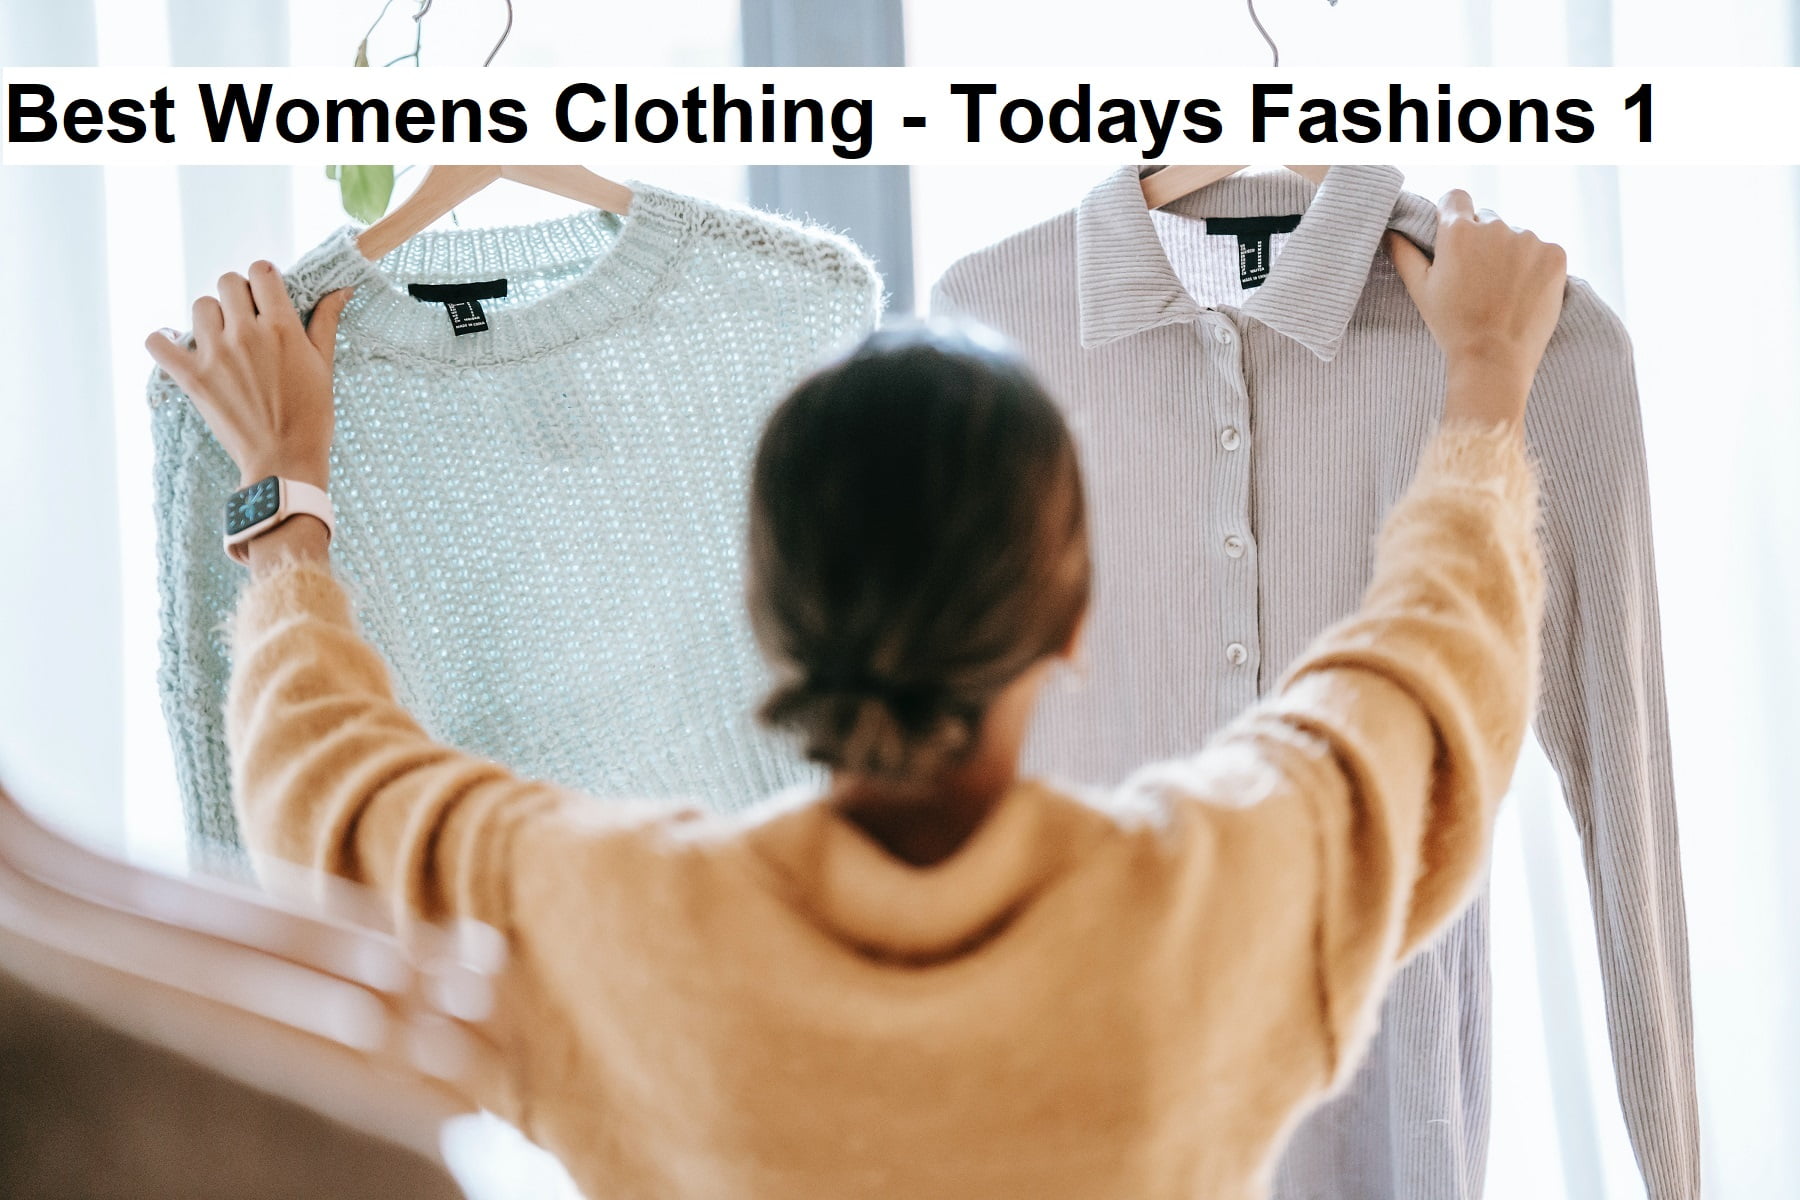 Best Womens Clothing - Todays Fashions 1